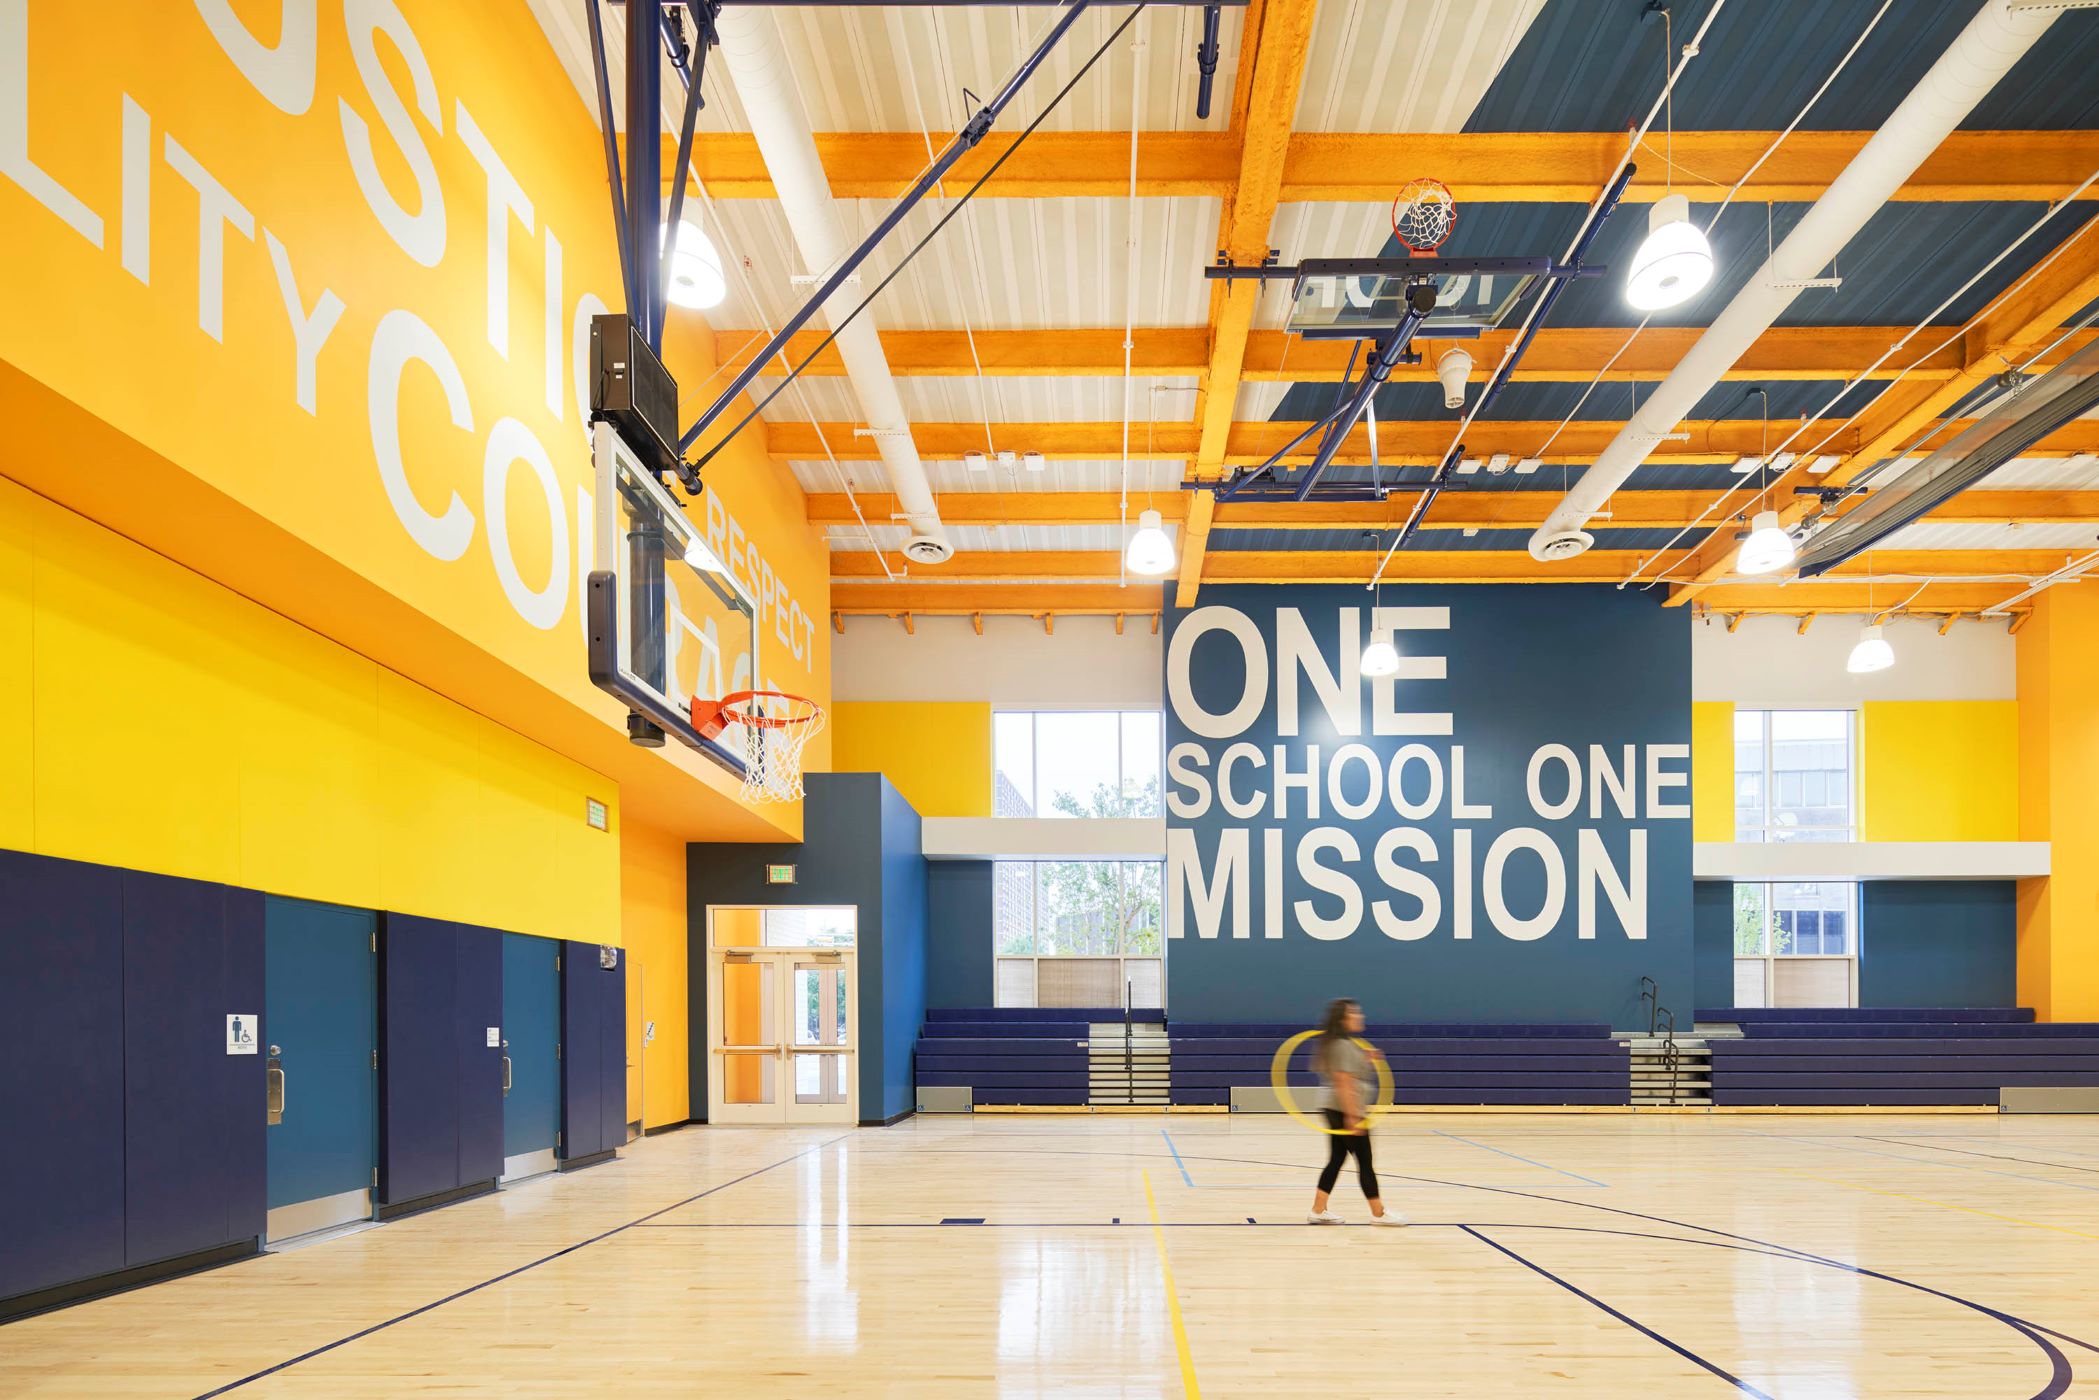 Gymnasium with a kid in the middle, featuring yellow and blue colors